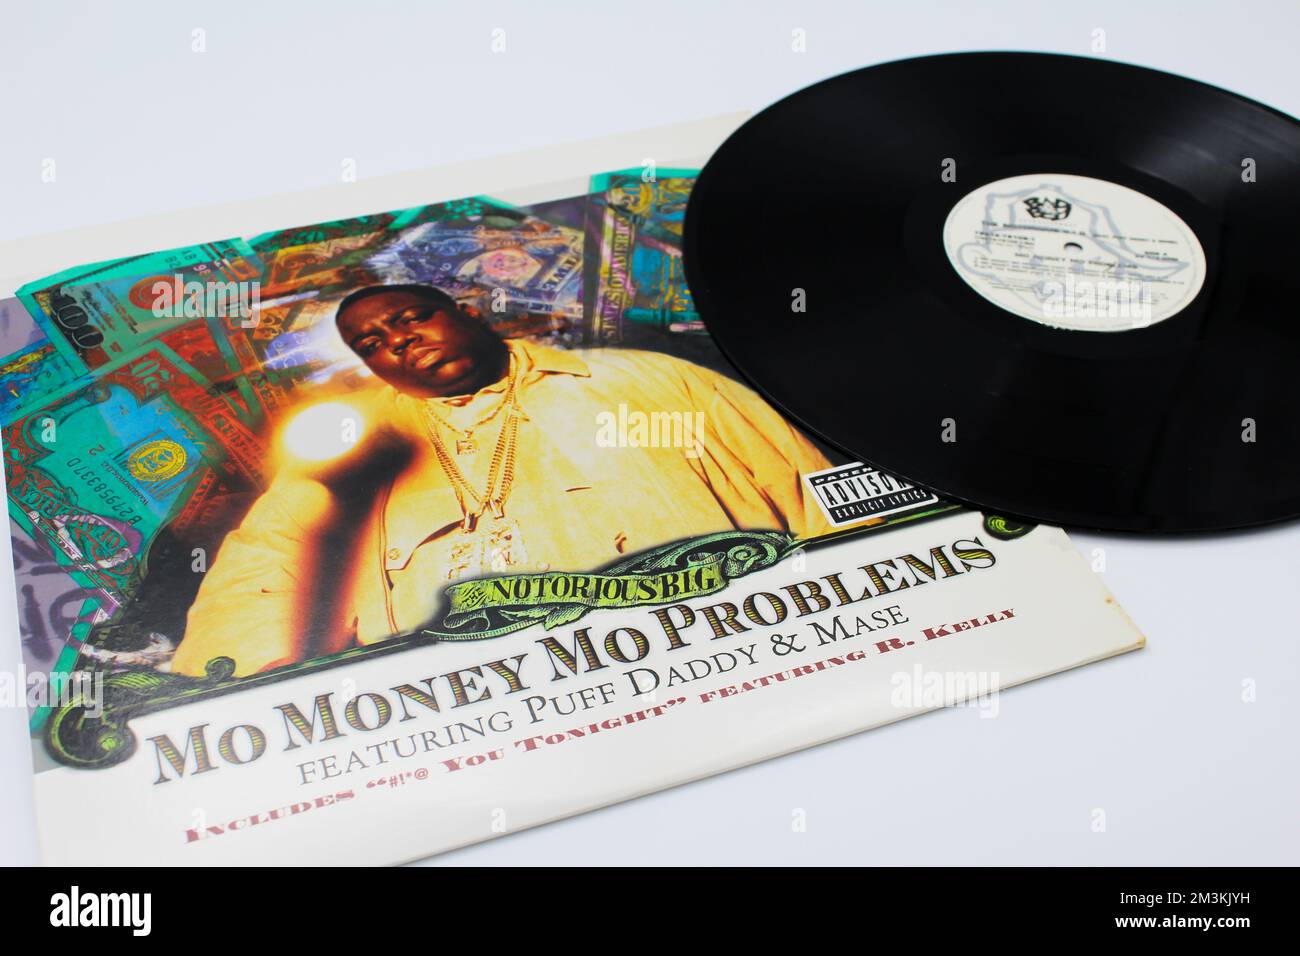 Mo Money Mo Problems is a song by American rapper The Notorious B.I.G aka Biggie Smalls from the album Life After Death on vinyl record LP disc. Stock Photo